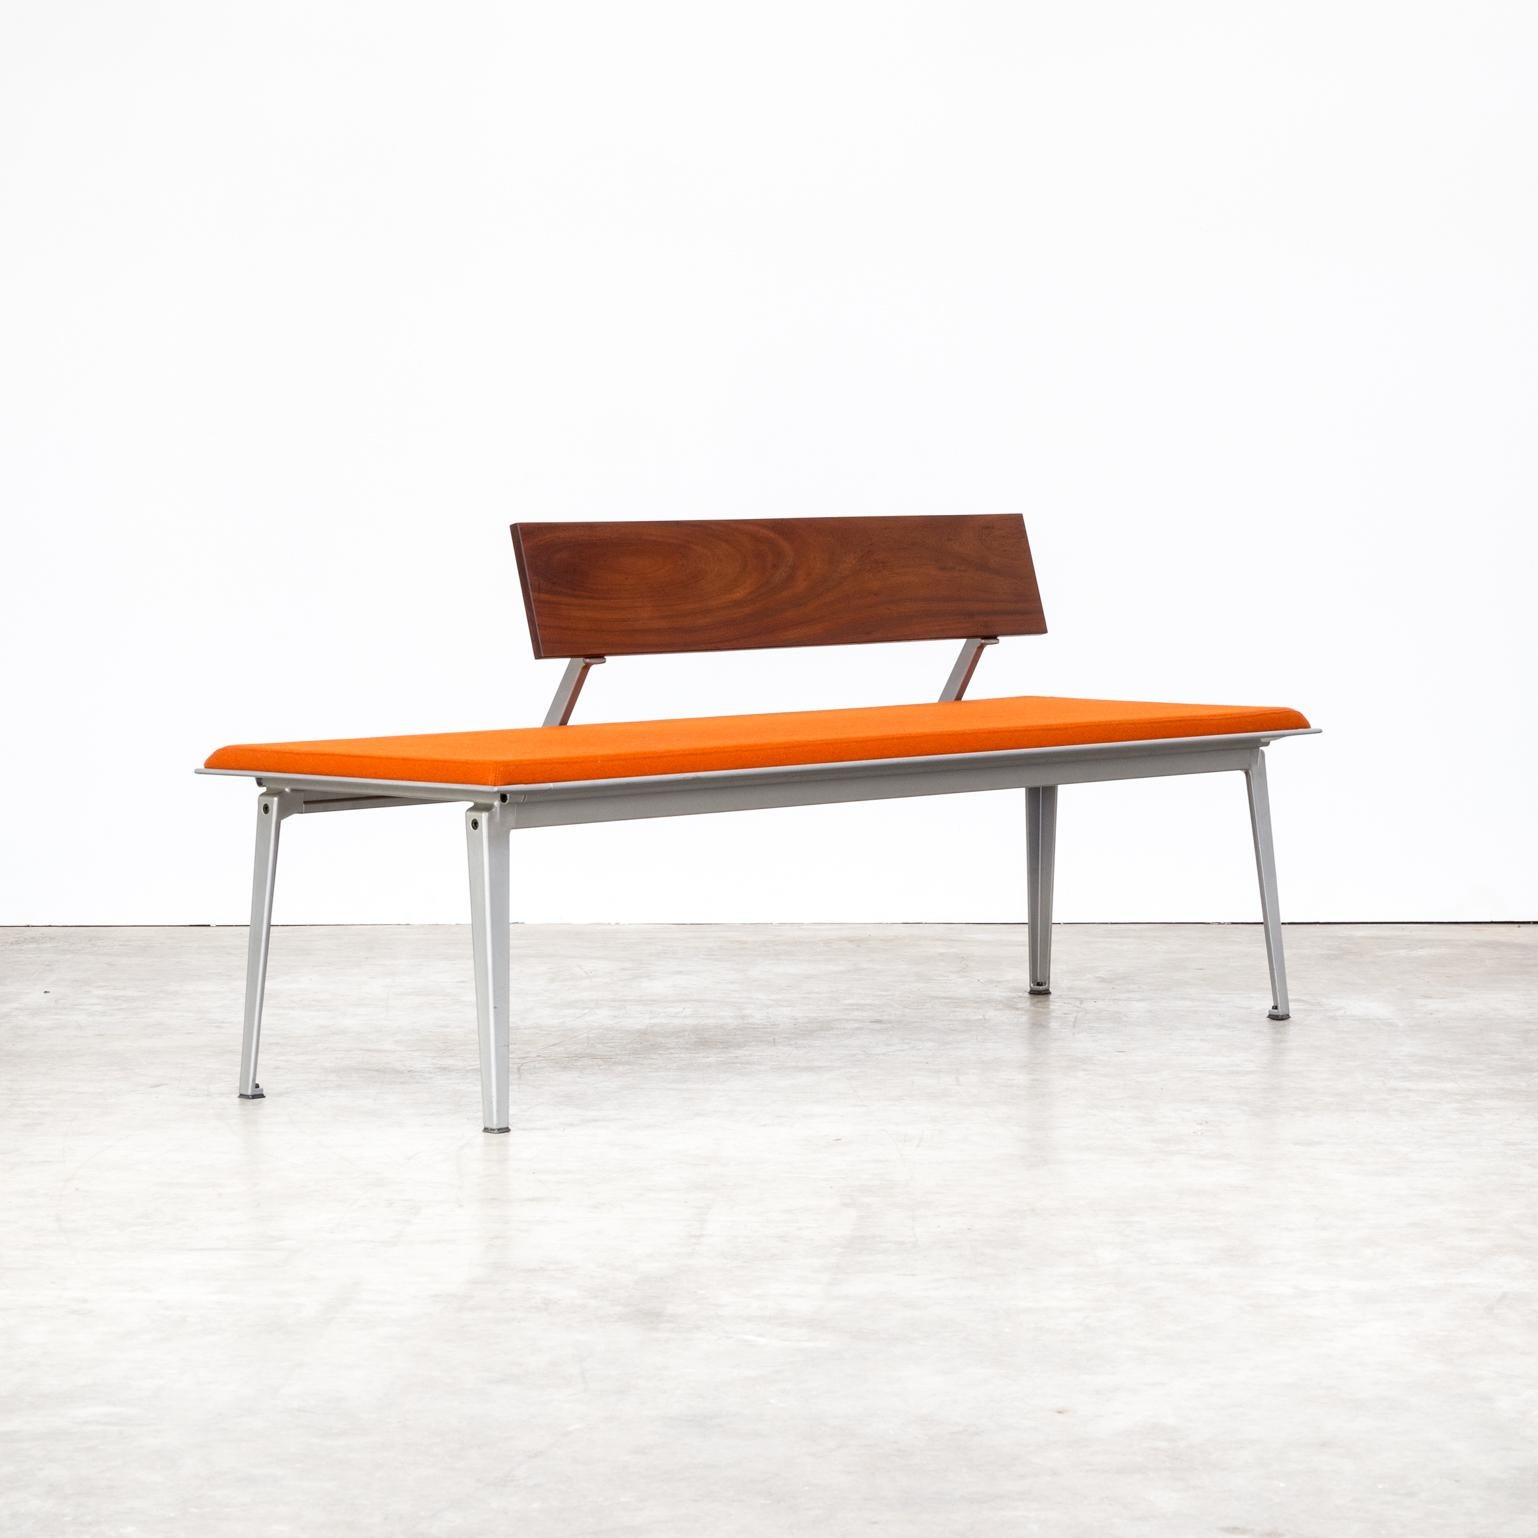 1990s Bas Pruyser ‘Ahrend 600’ Museum Bench for Ahrend de Cirkel For Sale 1